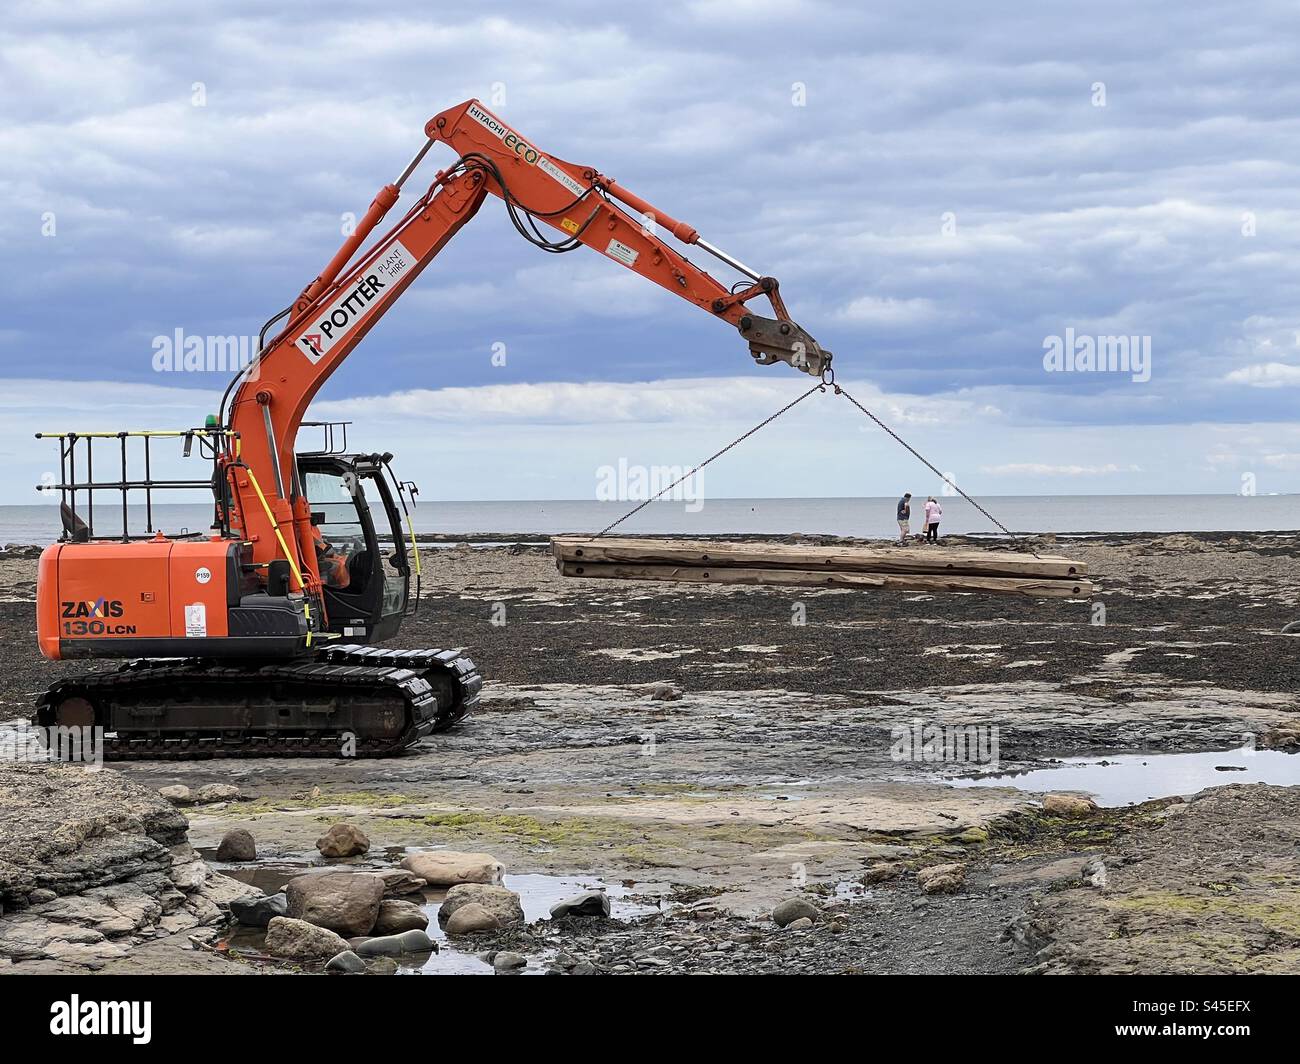 Tiny people hitch a lift on heavy plant Stock Photo